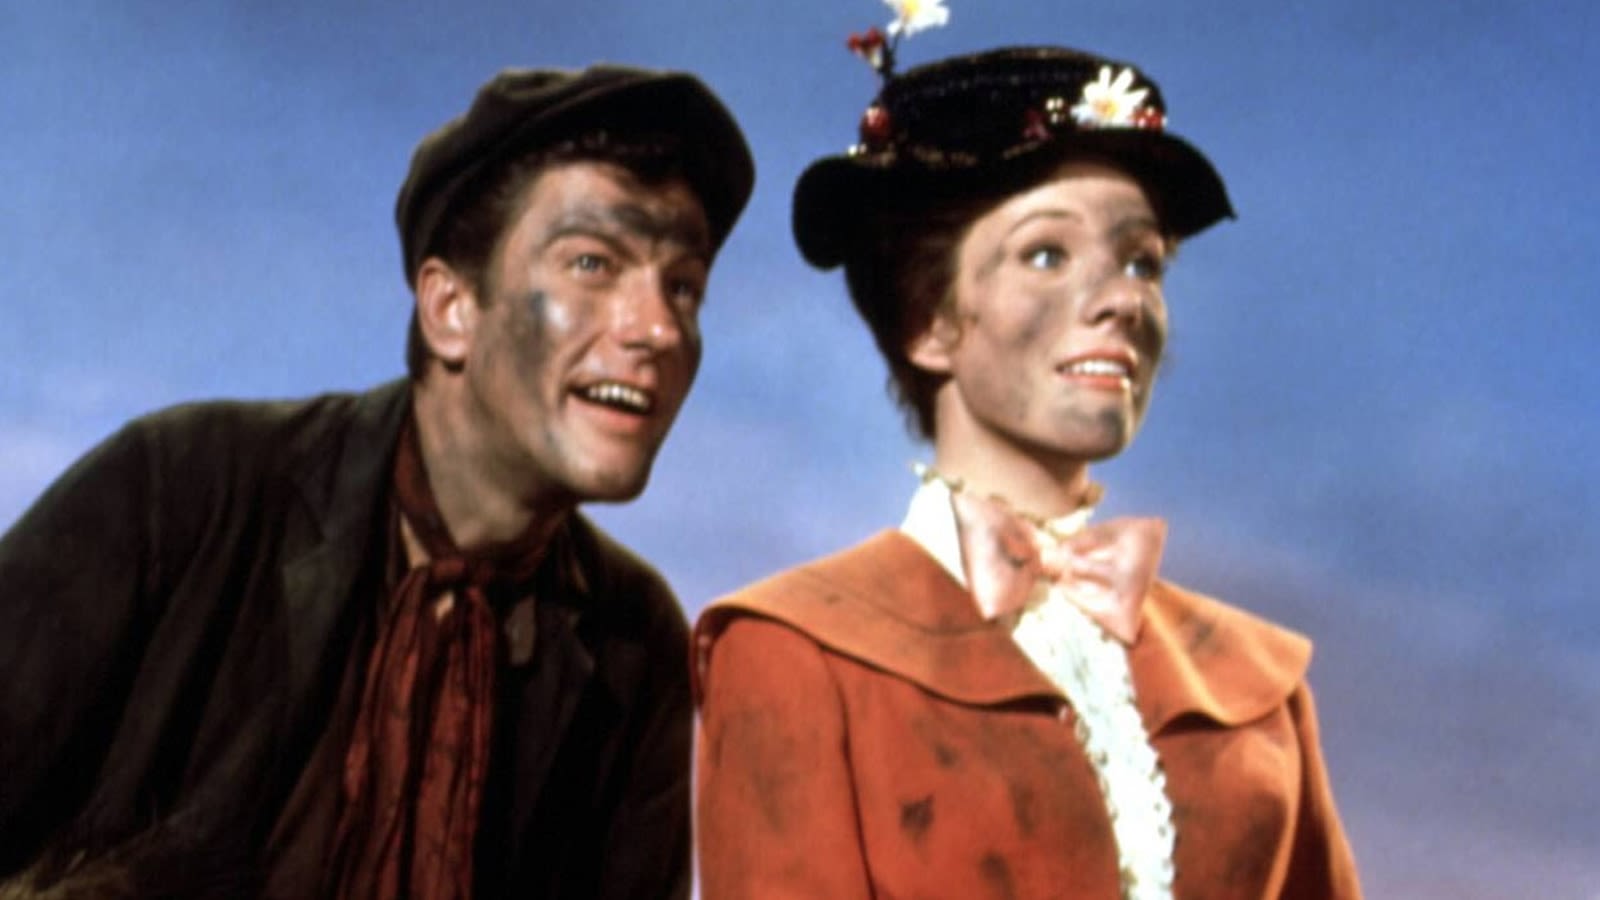 Dick Van Dyke on working with Julie Andrews in 'Mary Poppins': 'She was so patient with me'